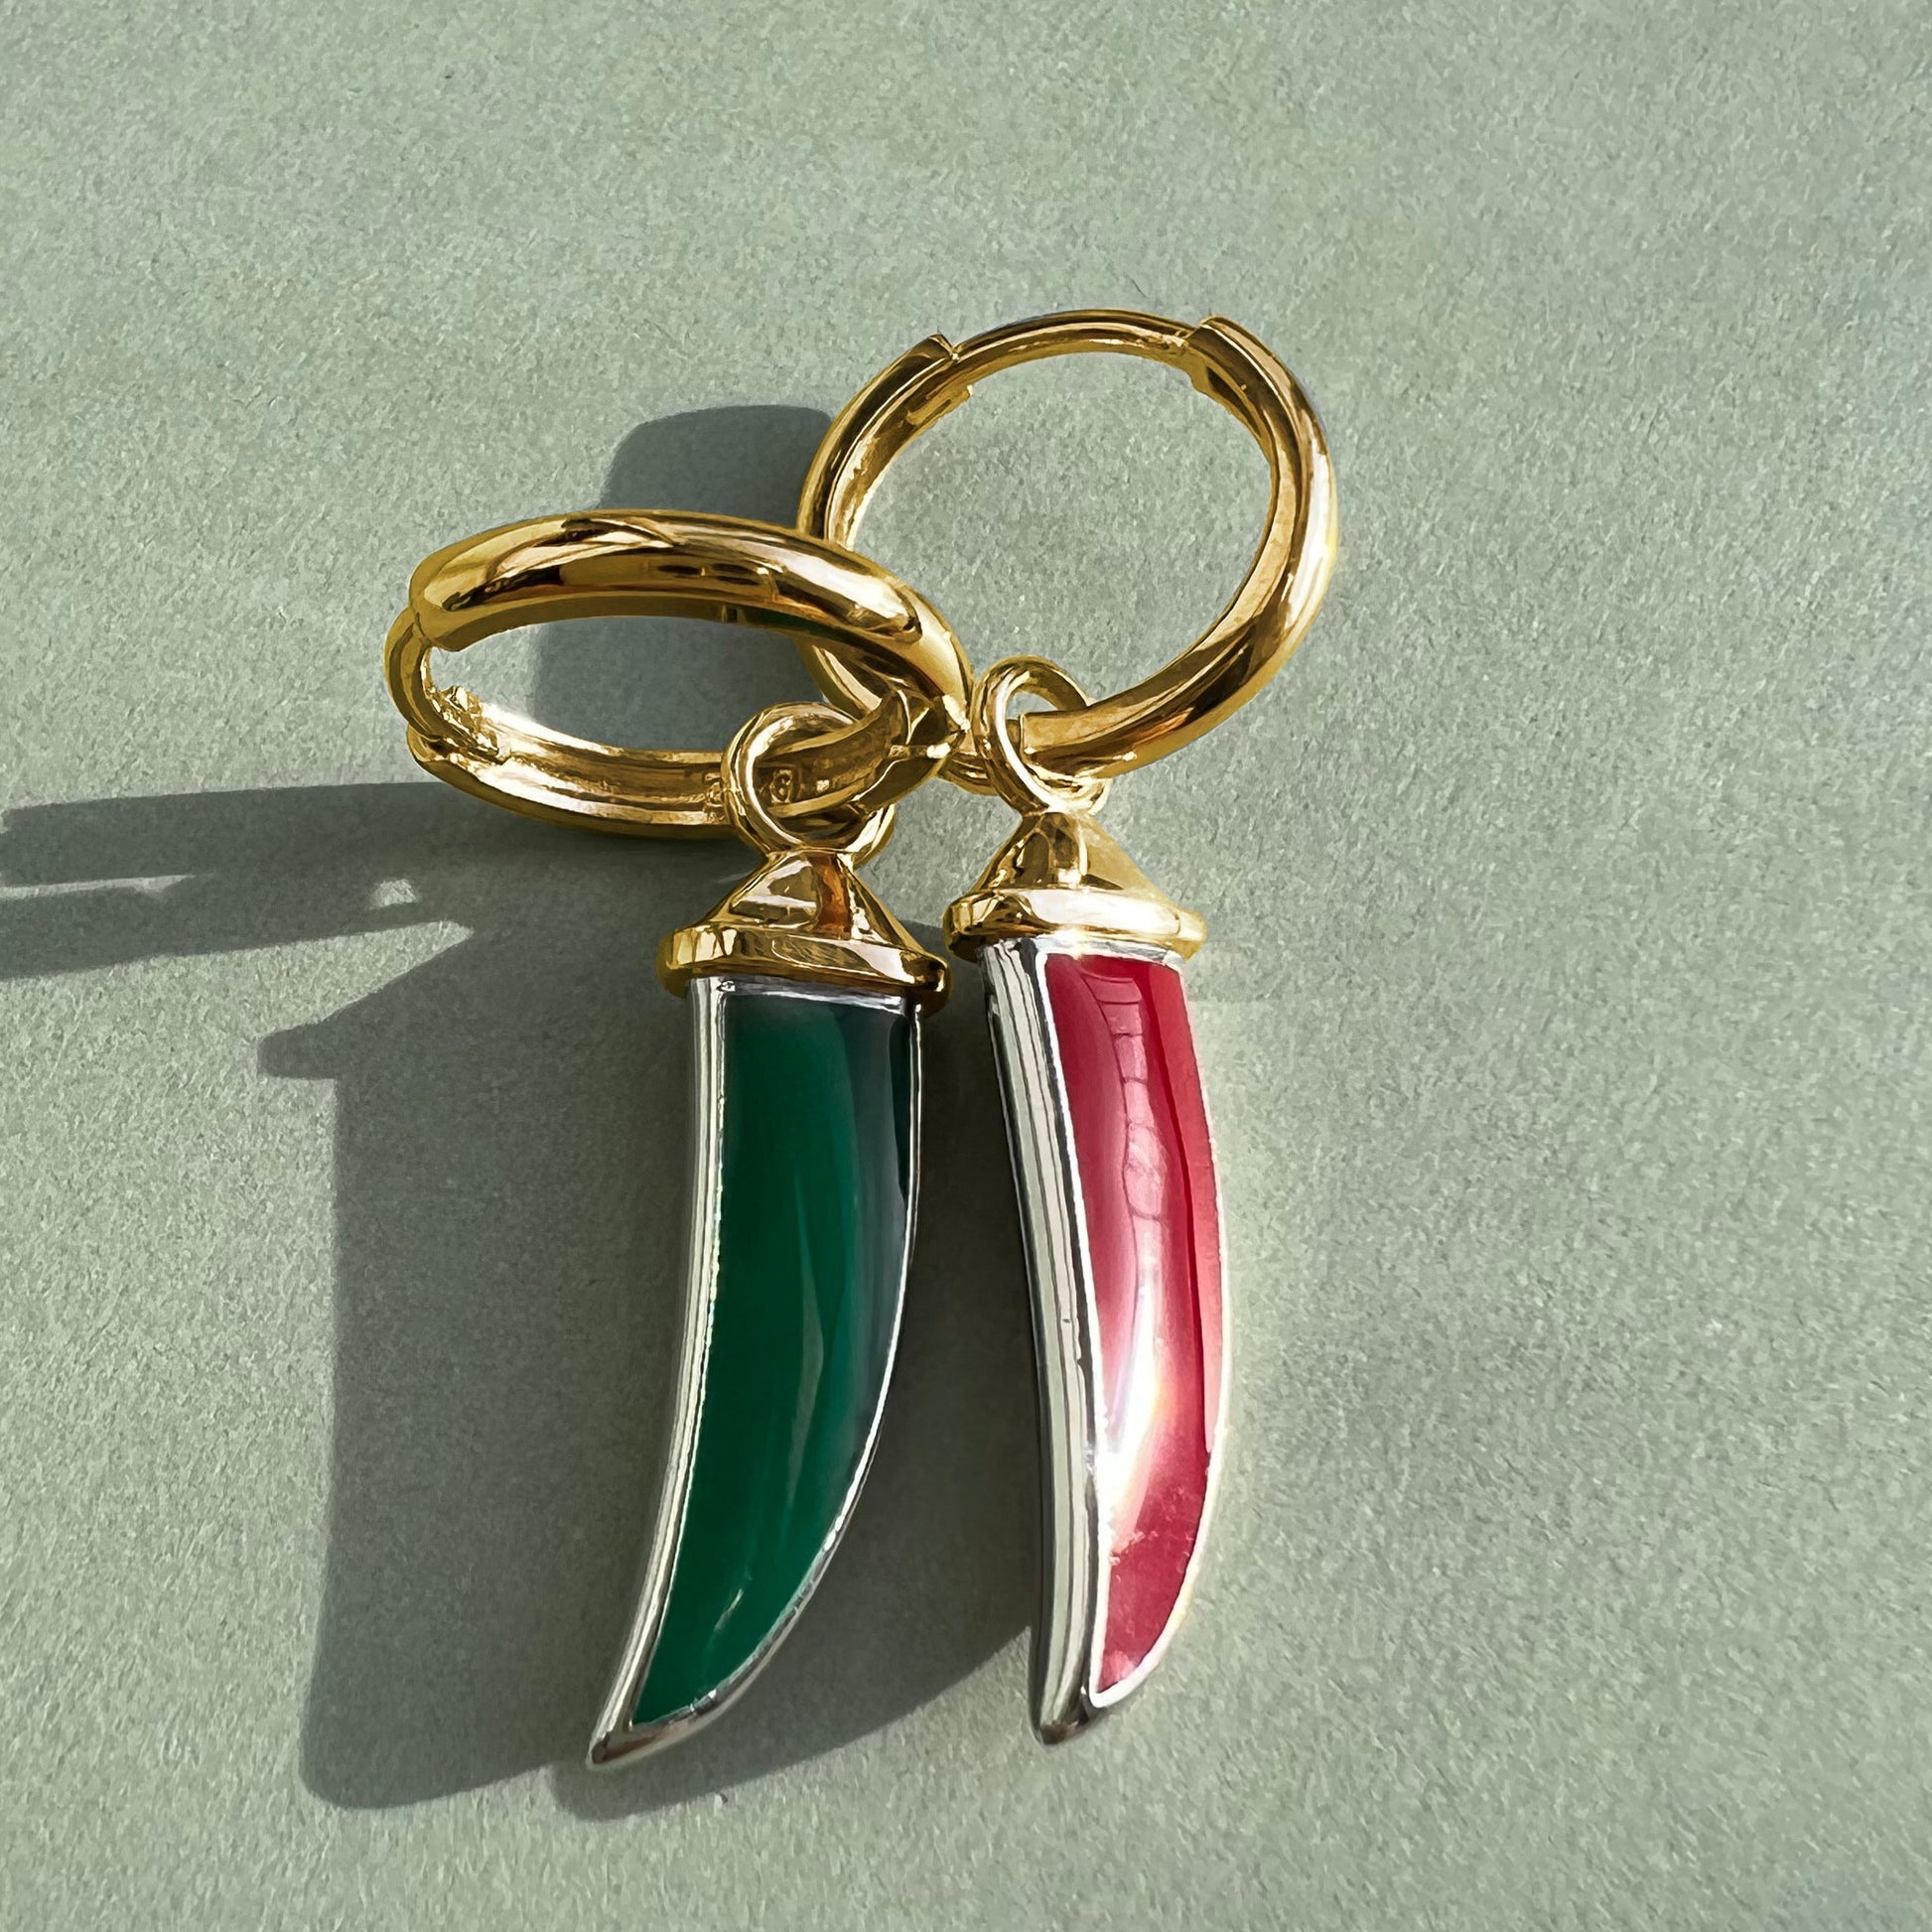 EARRING "HOT CHILI' / SOLID GOLD & SILVER WITH COLORED ENAMEL